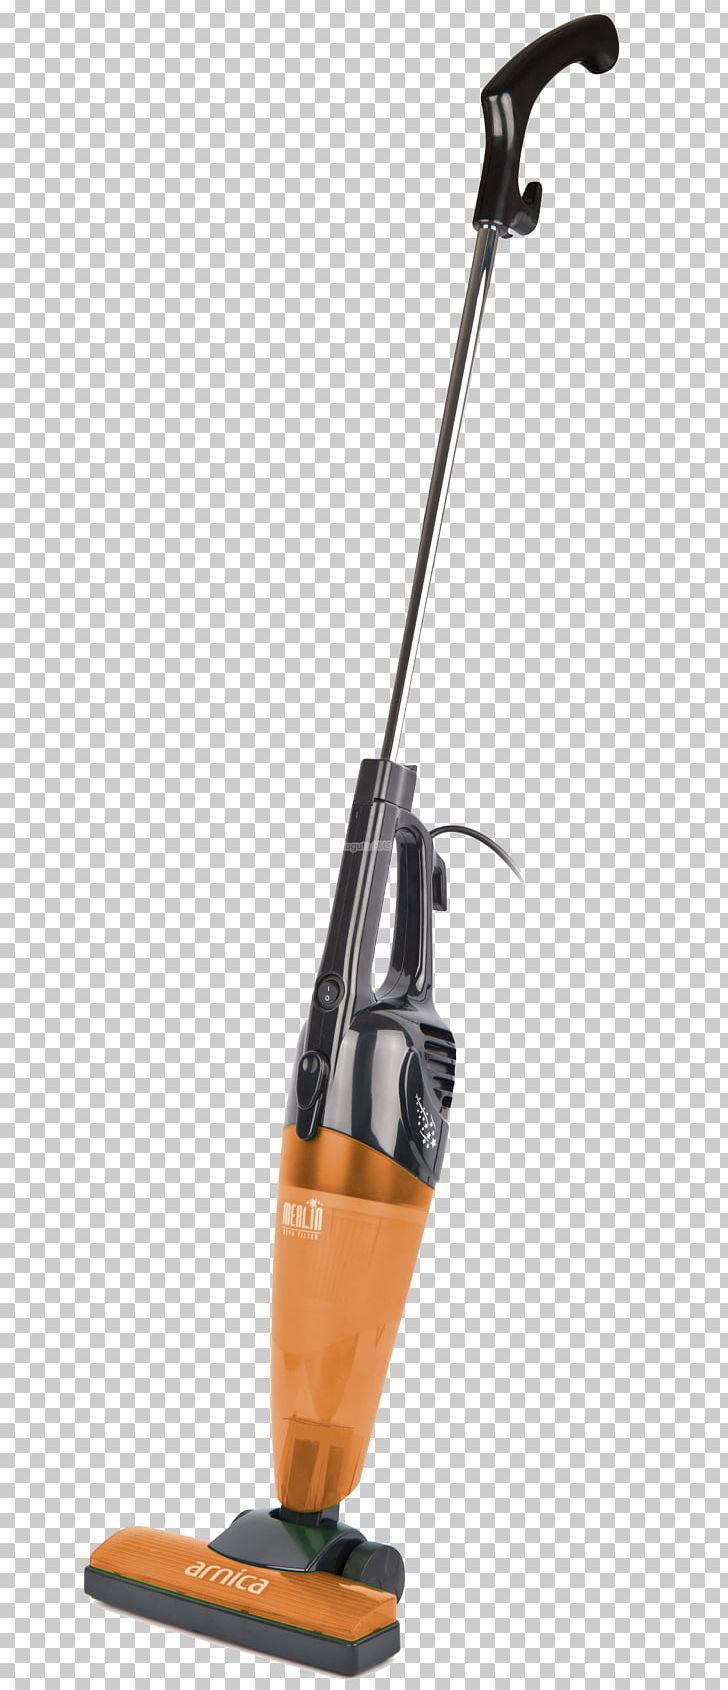 Vacuum Cleaner HEPA Dust Cleaning PNG, Clipart, Arnica, Carpet, Clean, Cleaner, Cleaning Free PNG Download